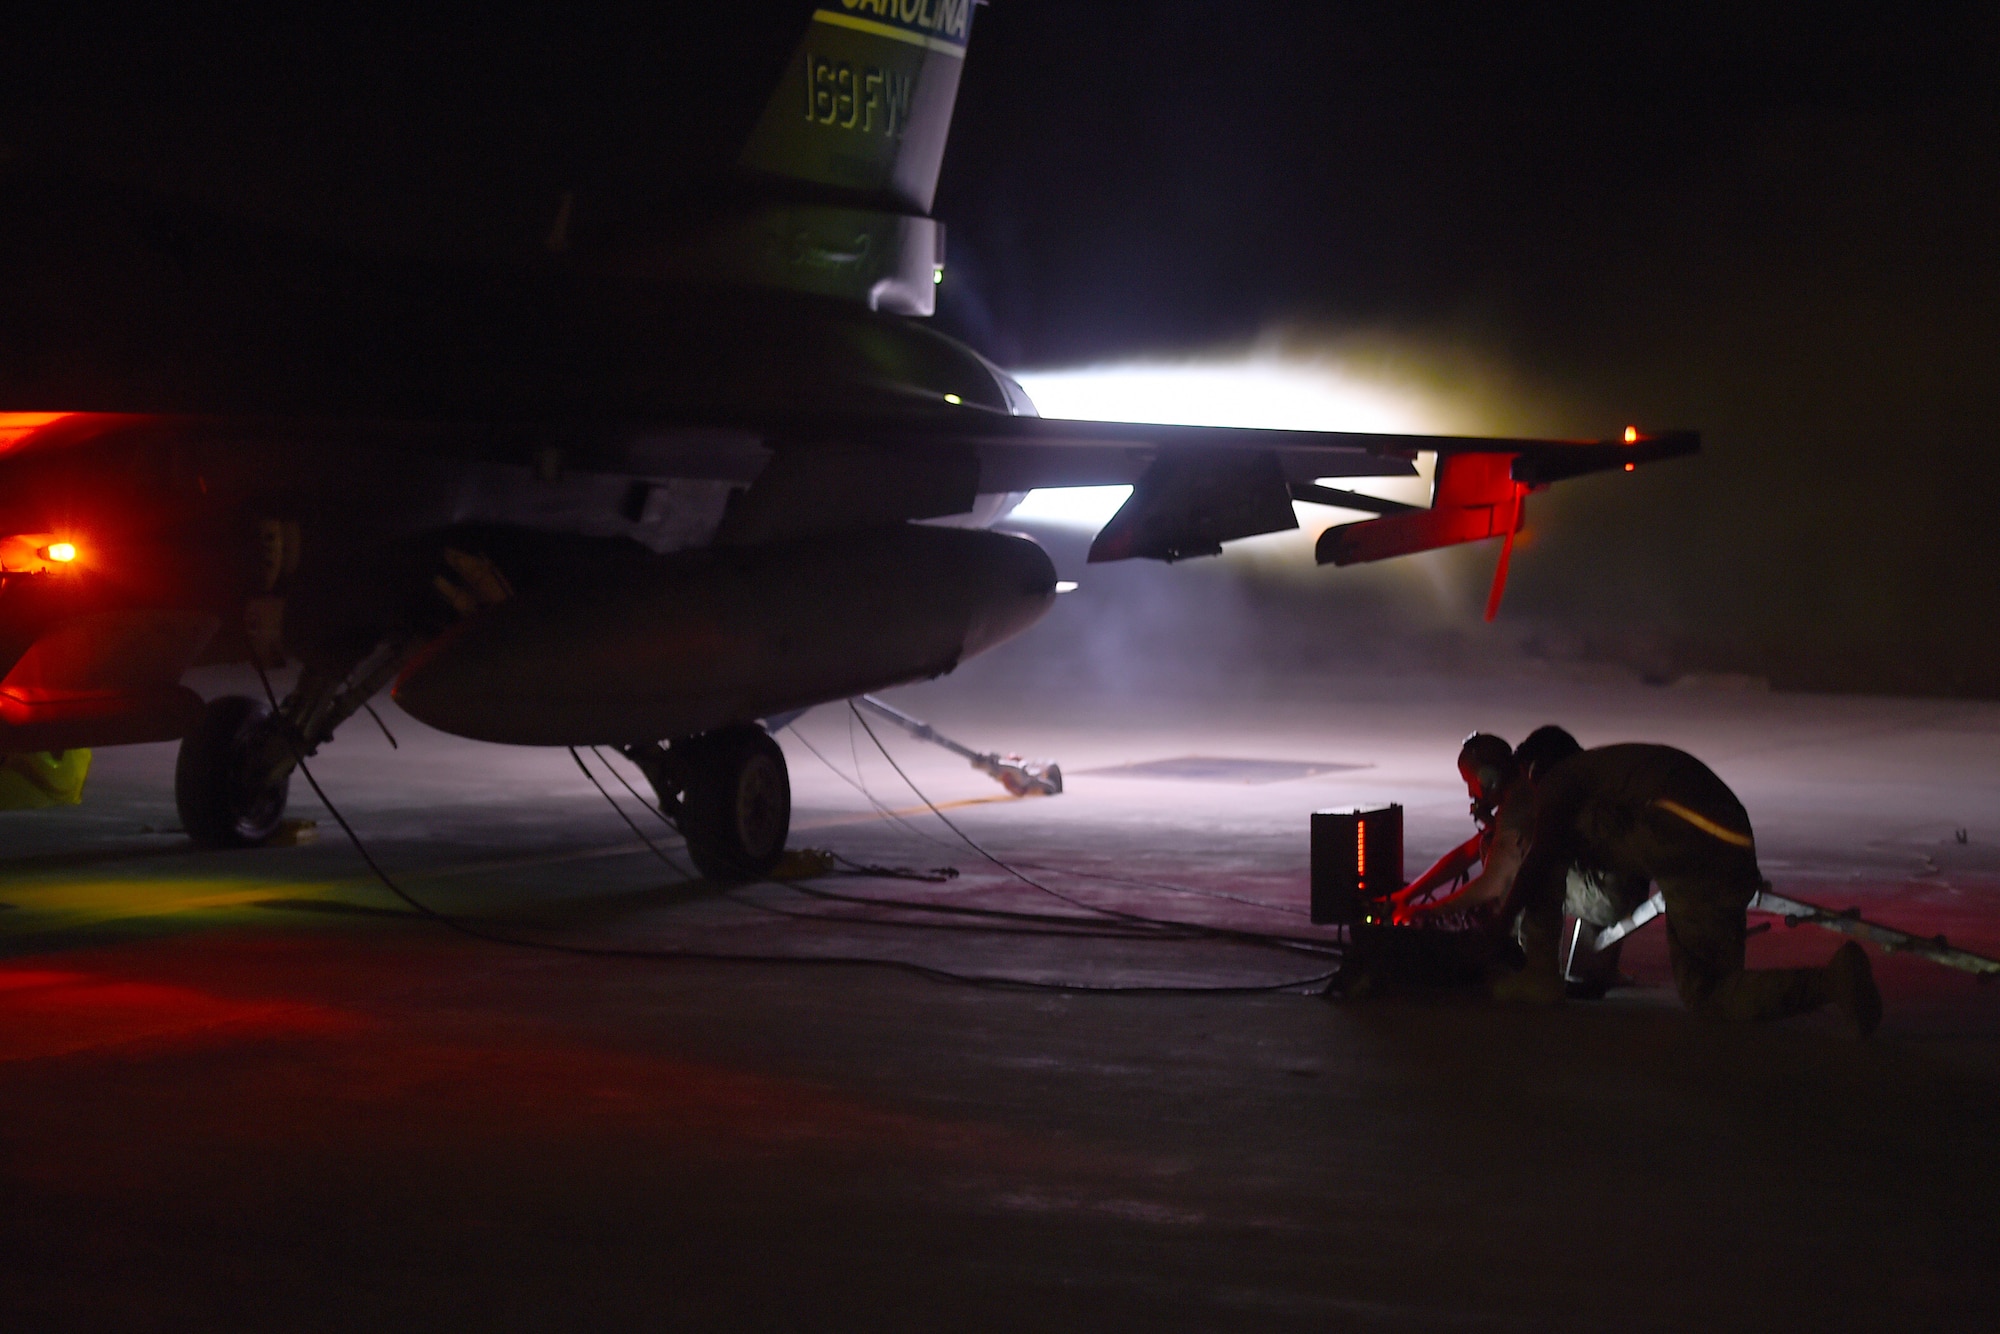 An  F-16 Fighting Falcon performs and afterburner run on the flightline at night